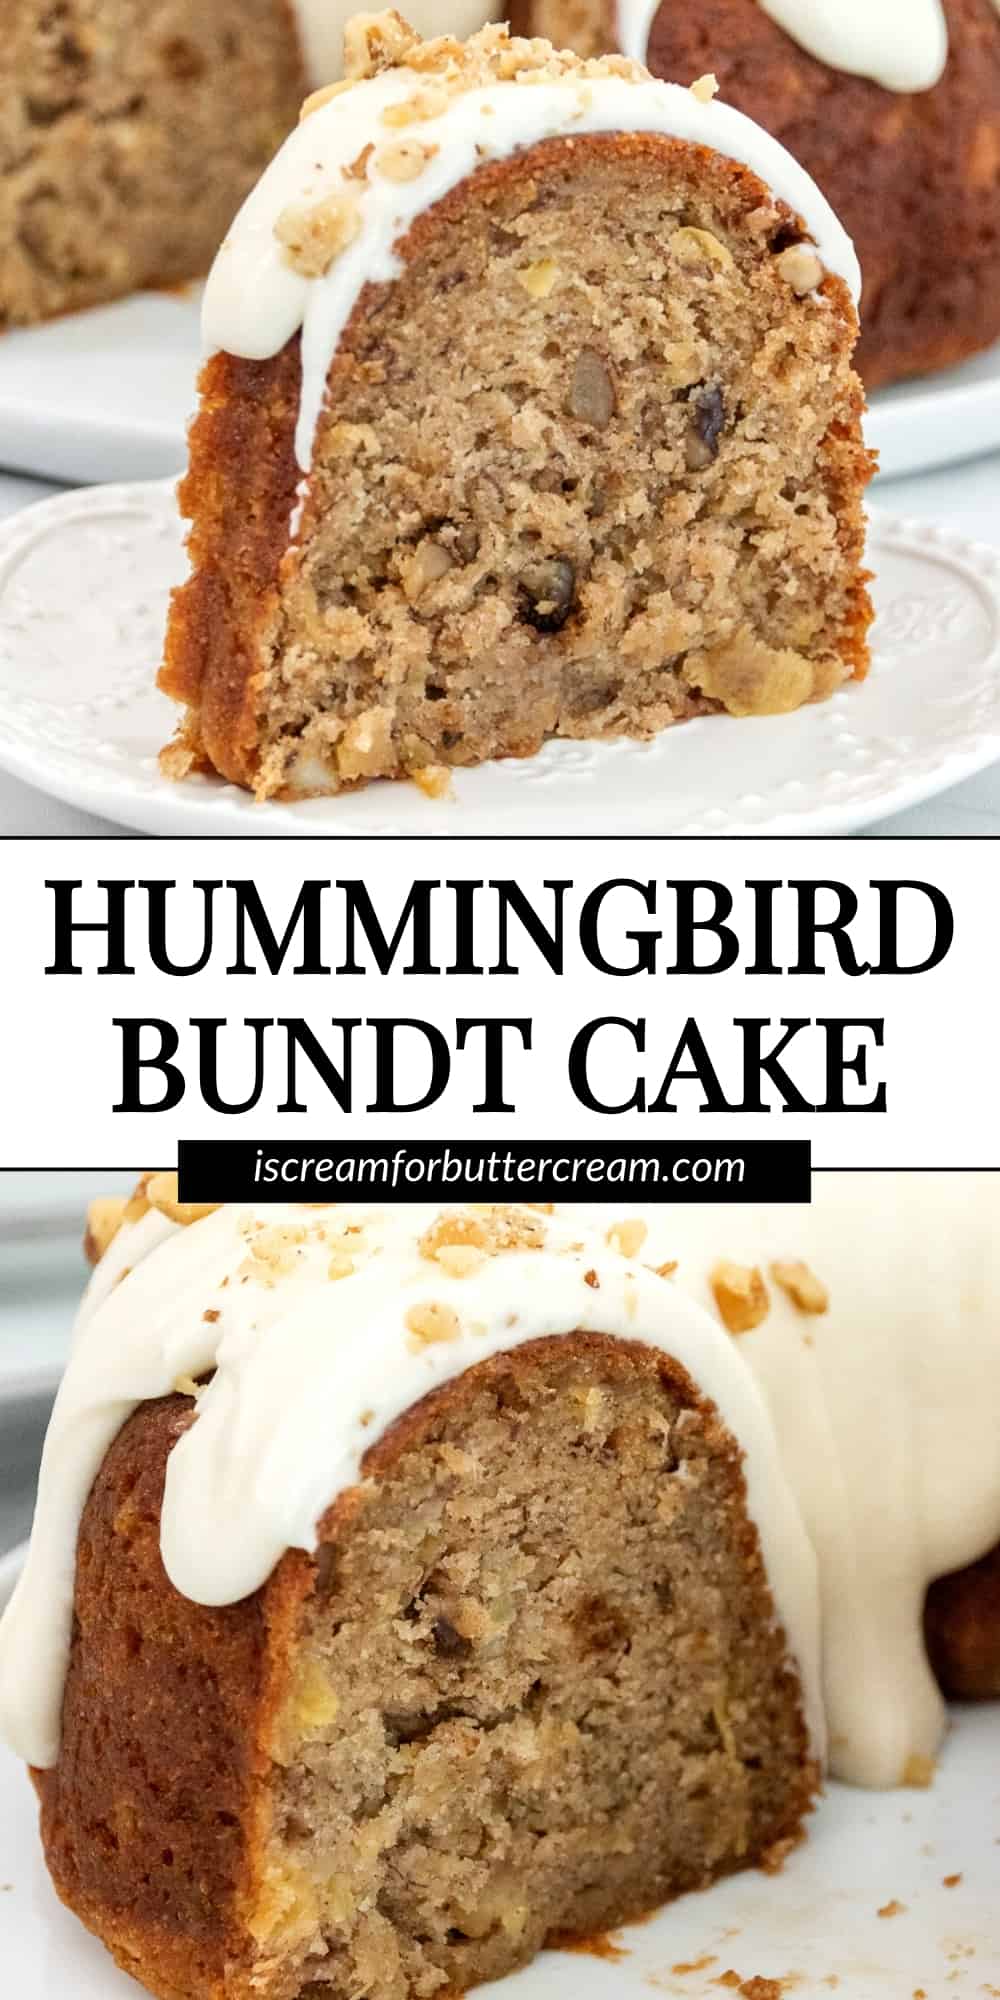 Pinterest image with slices of hummingbird cake with glaze and text overlay.